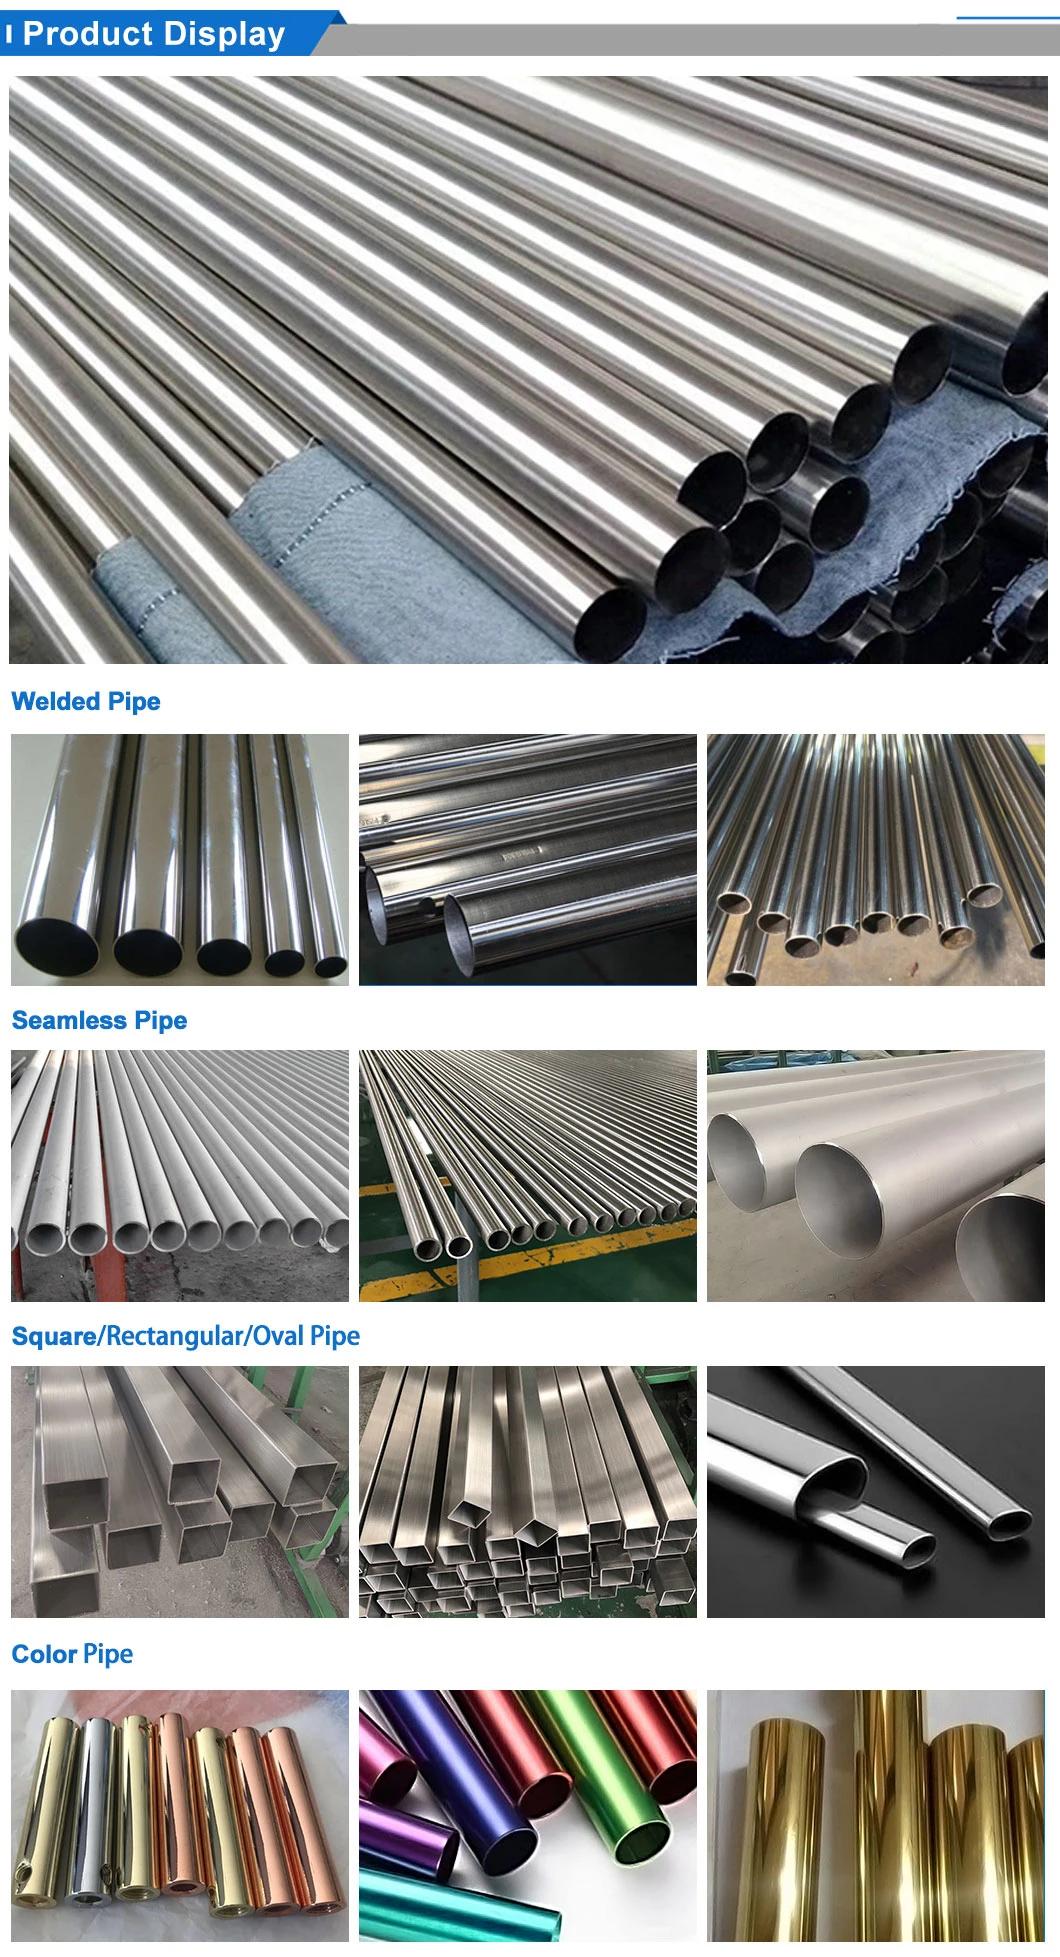 Seamless Stainless Steel Pipe TP304L / 316L Bright Annealed Tube Stainless Steel for Instrumentation